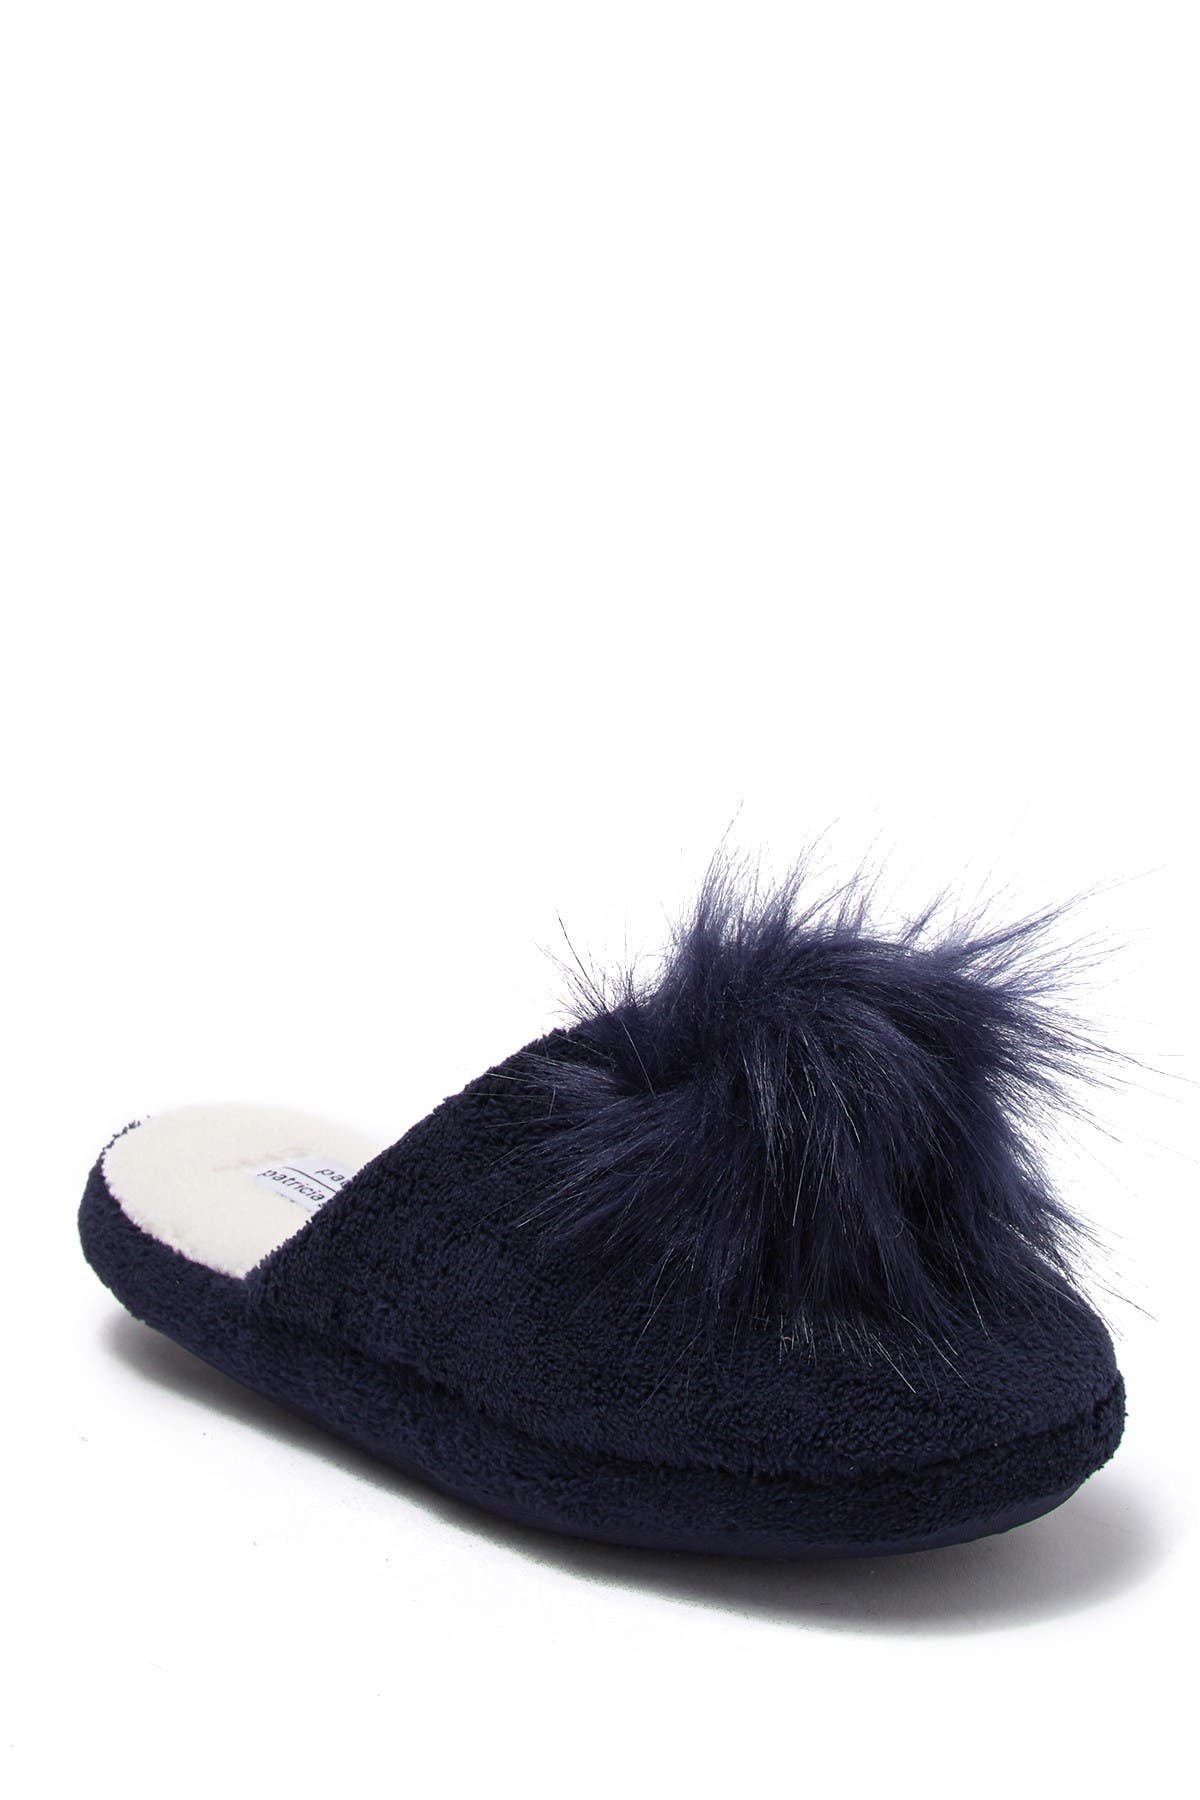 patricia green slippers nordstrom